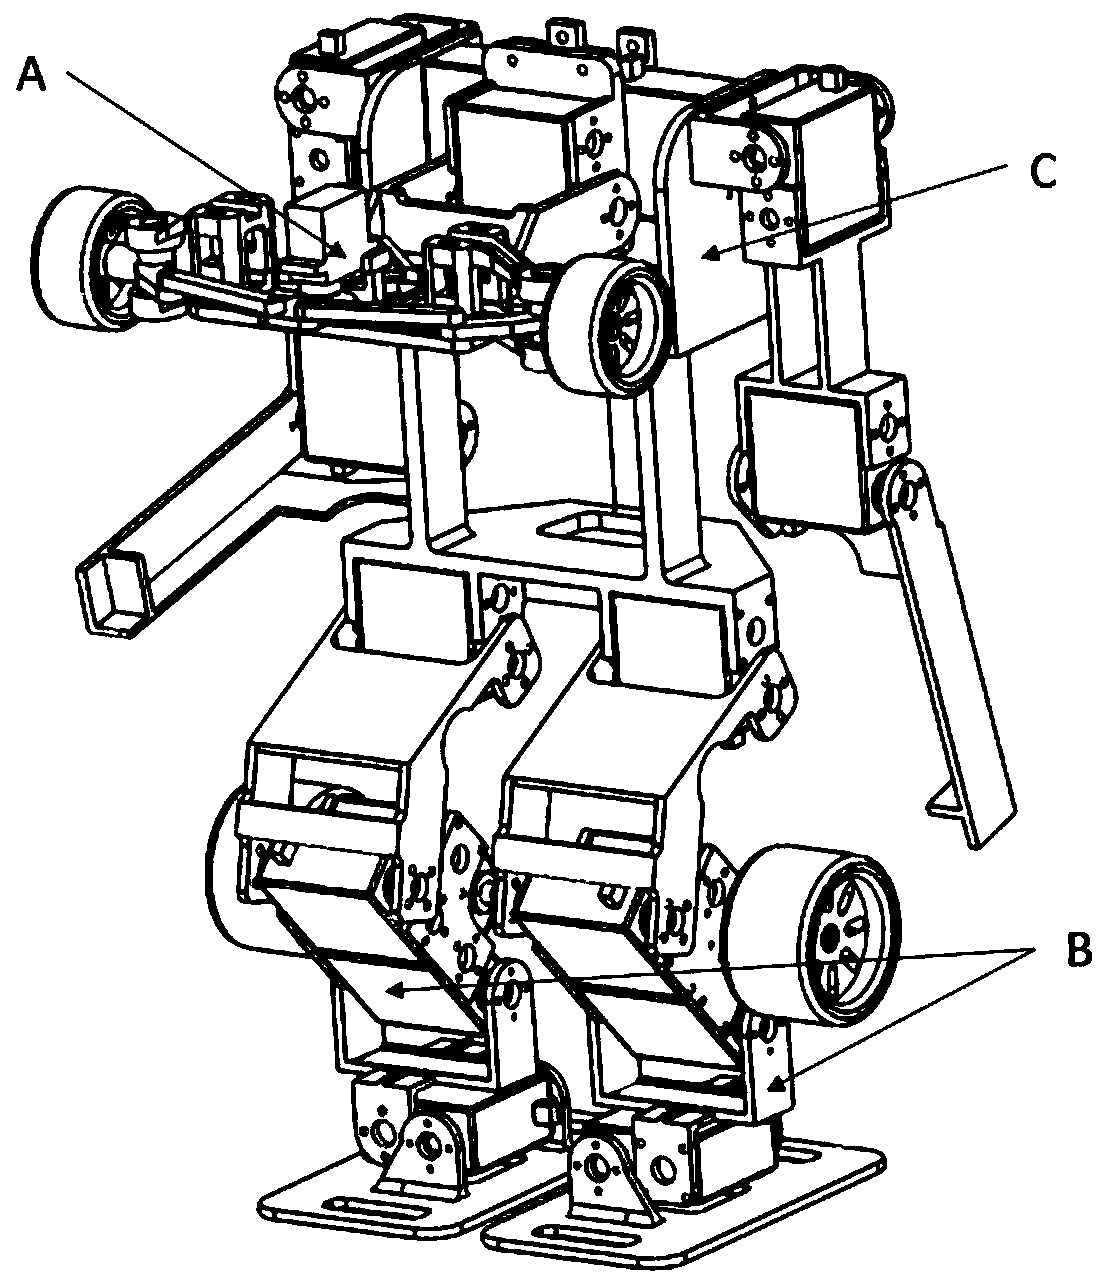 A structure-changing robot